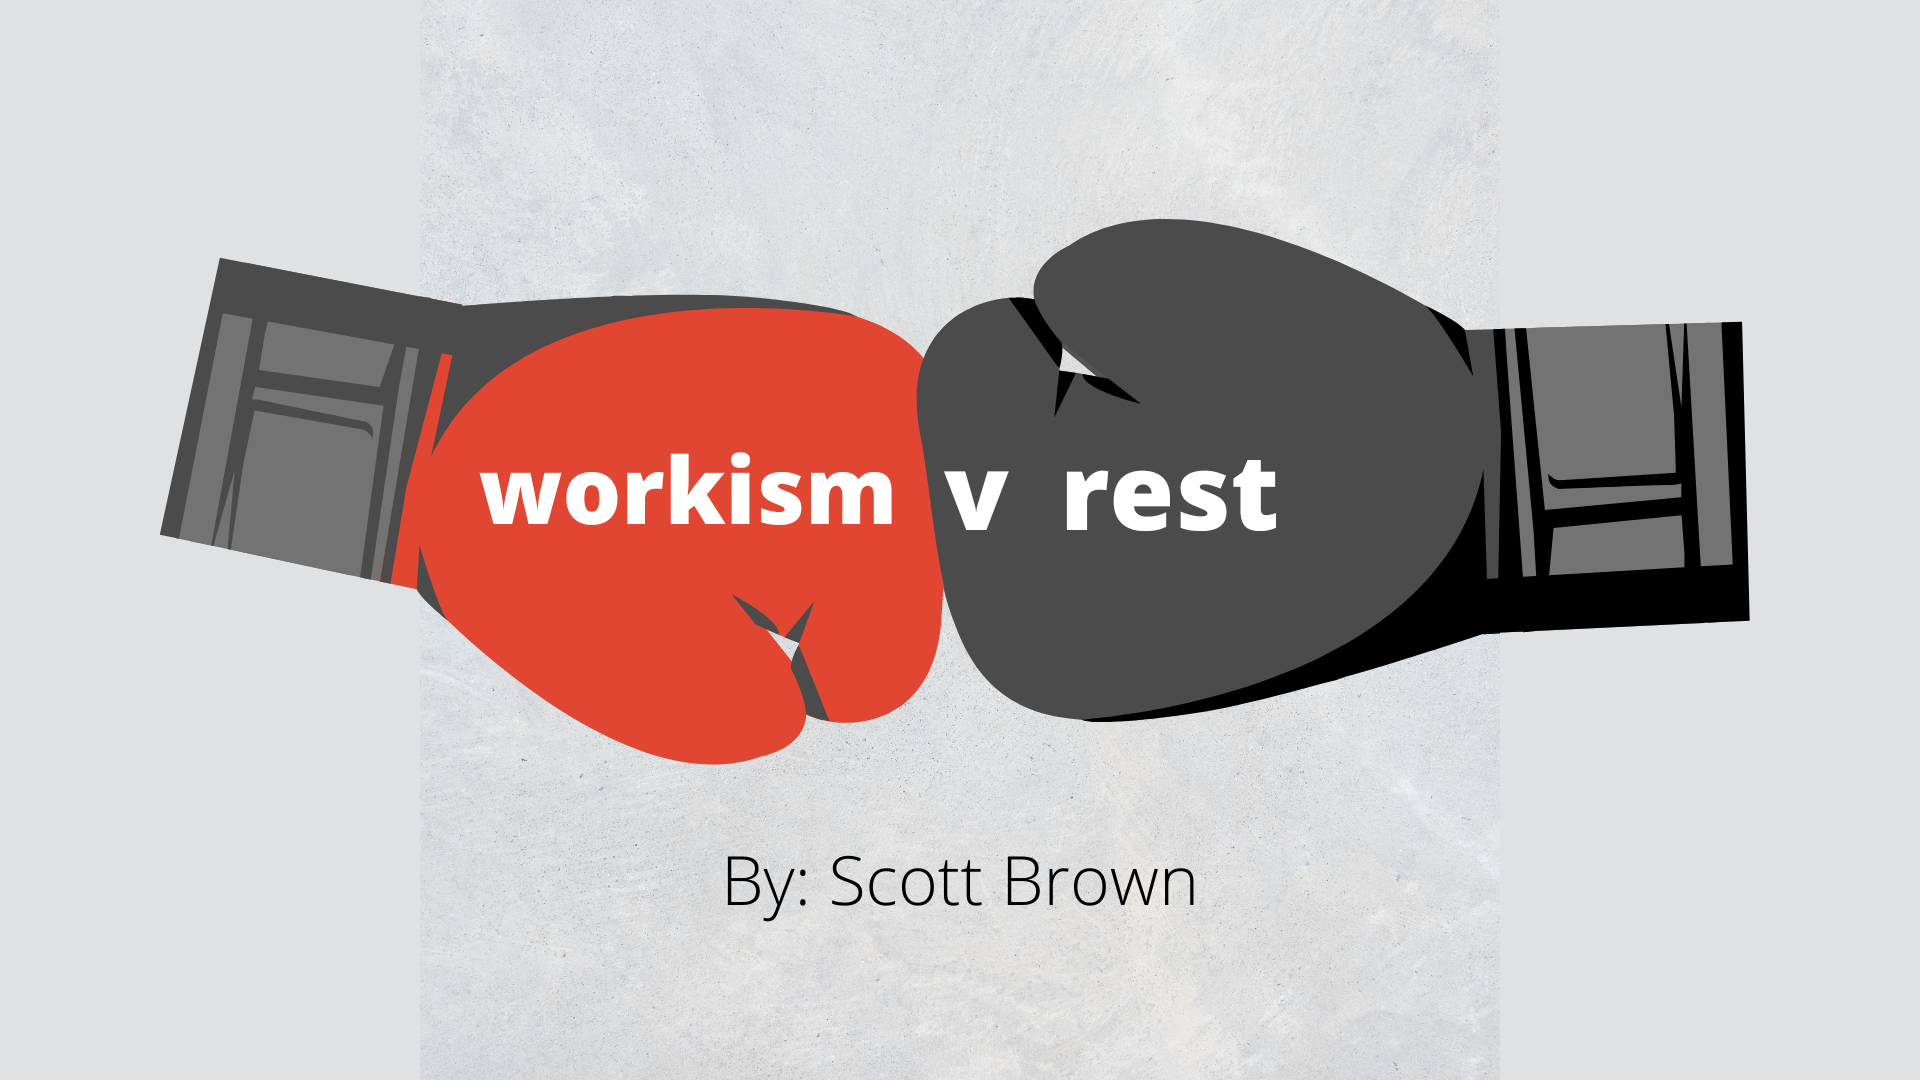 workism v rest ariticle by Scott Brown